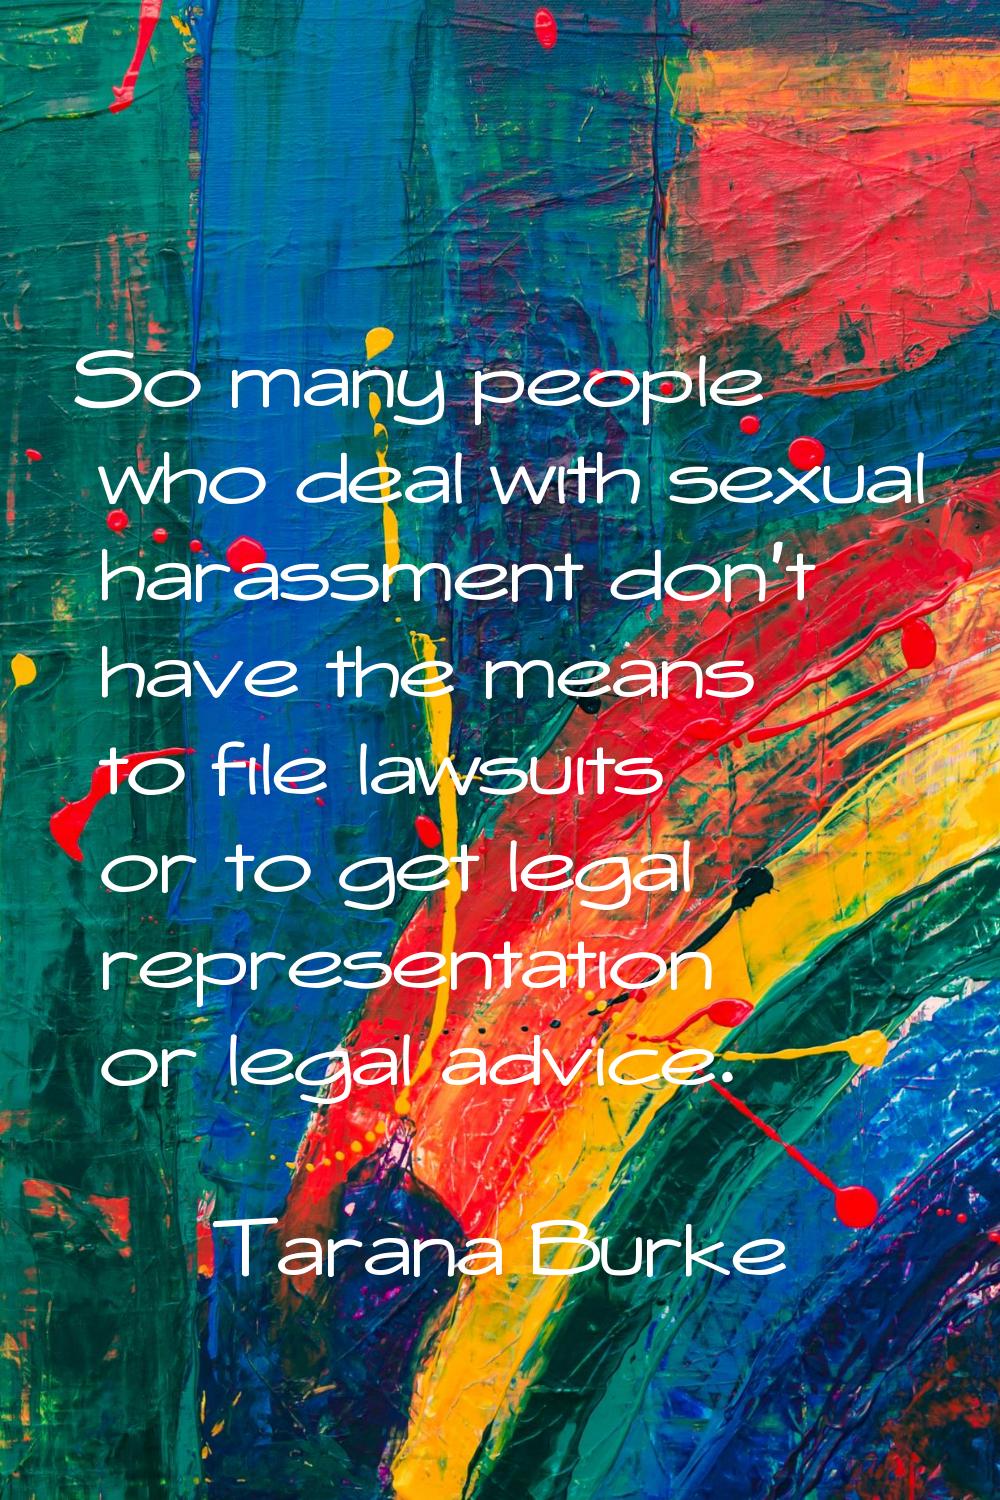 So many people who deal with sexual harassment don't have the means to file lawsuits or to get lega